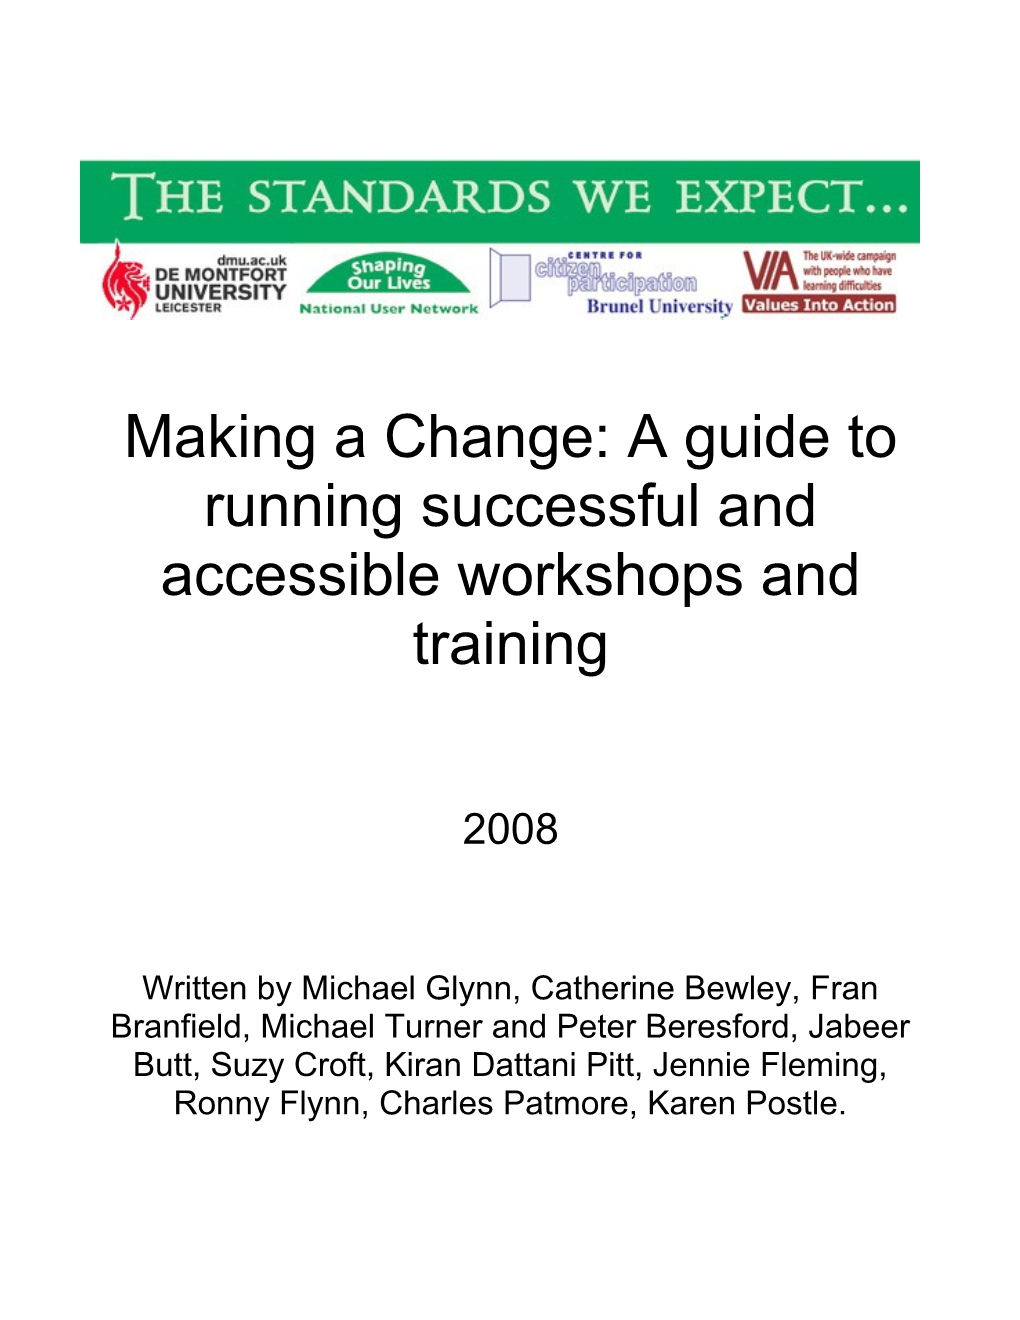 Making a Change Guide